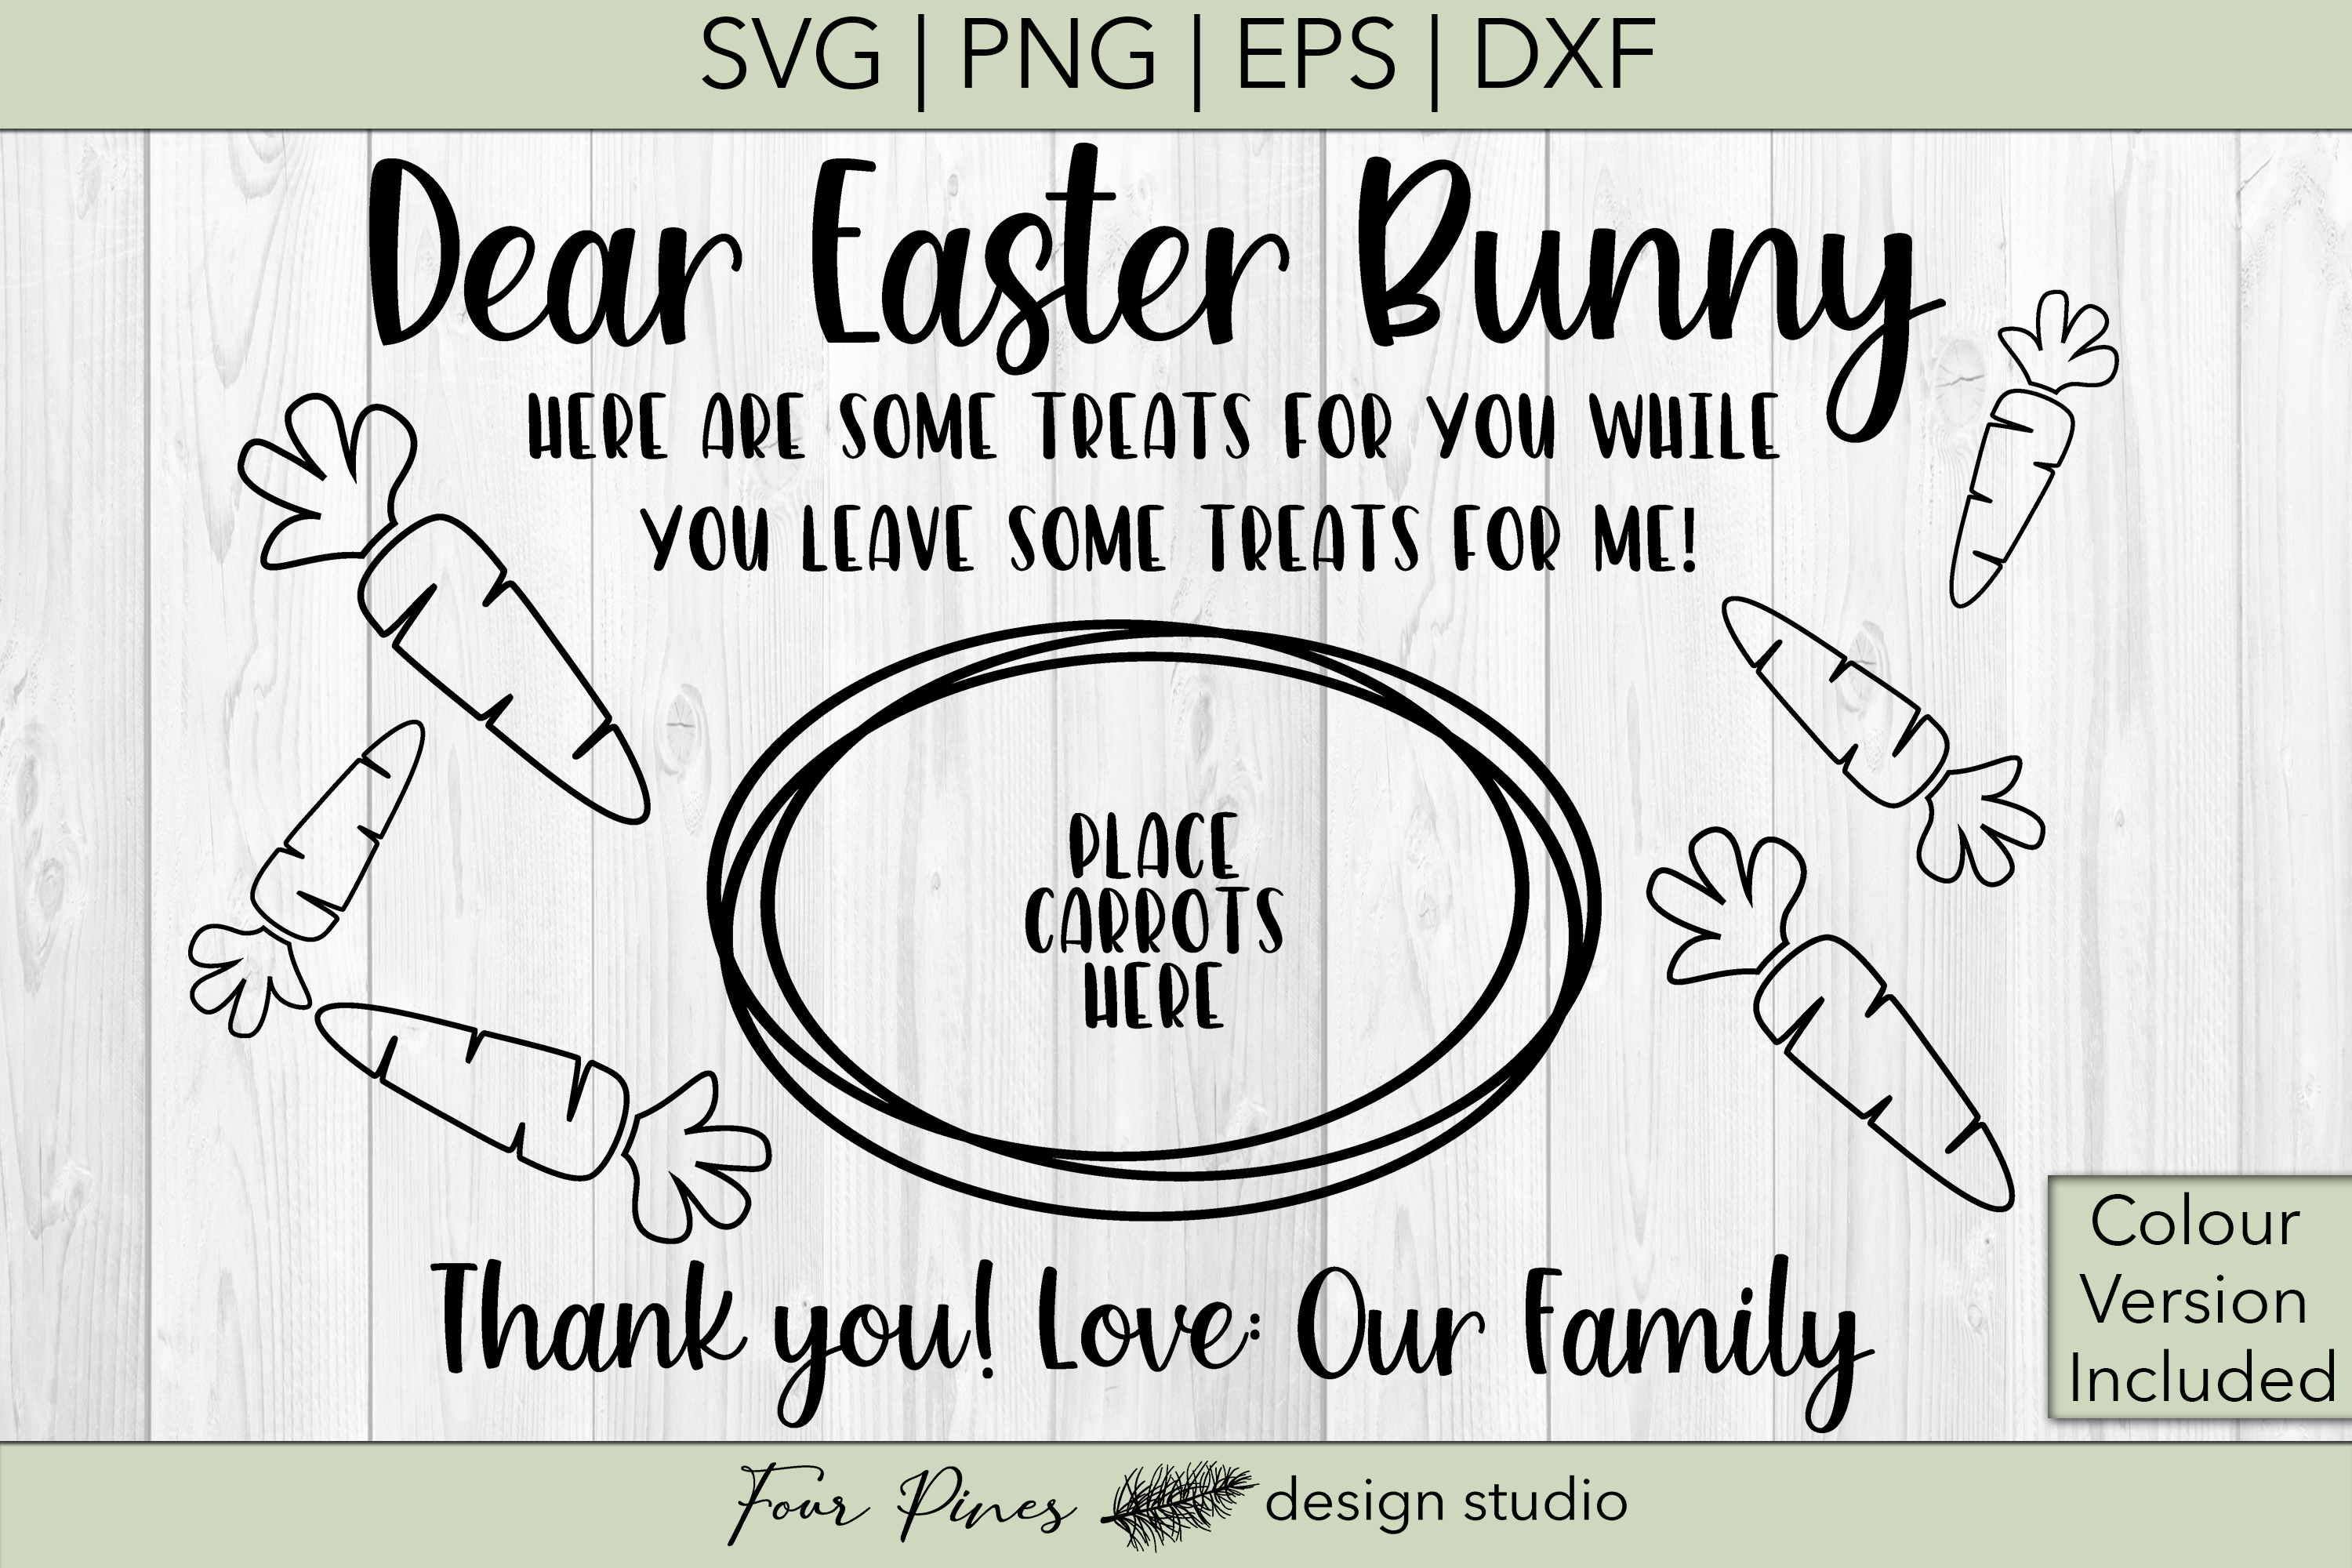 Dear Easter Bunny Love Our Family - 2 files included! V.1